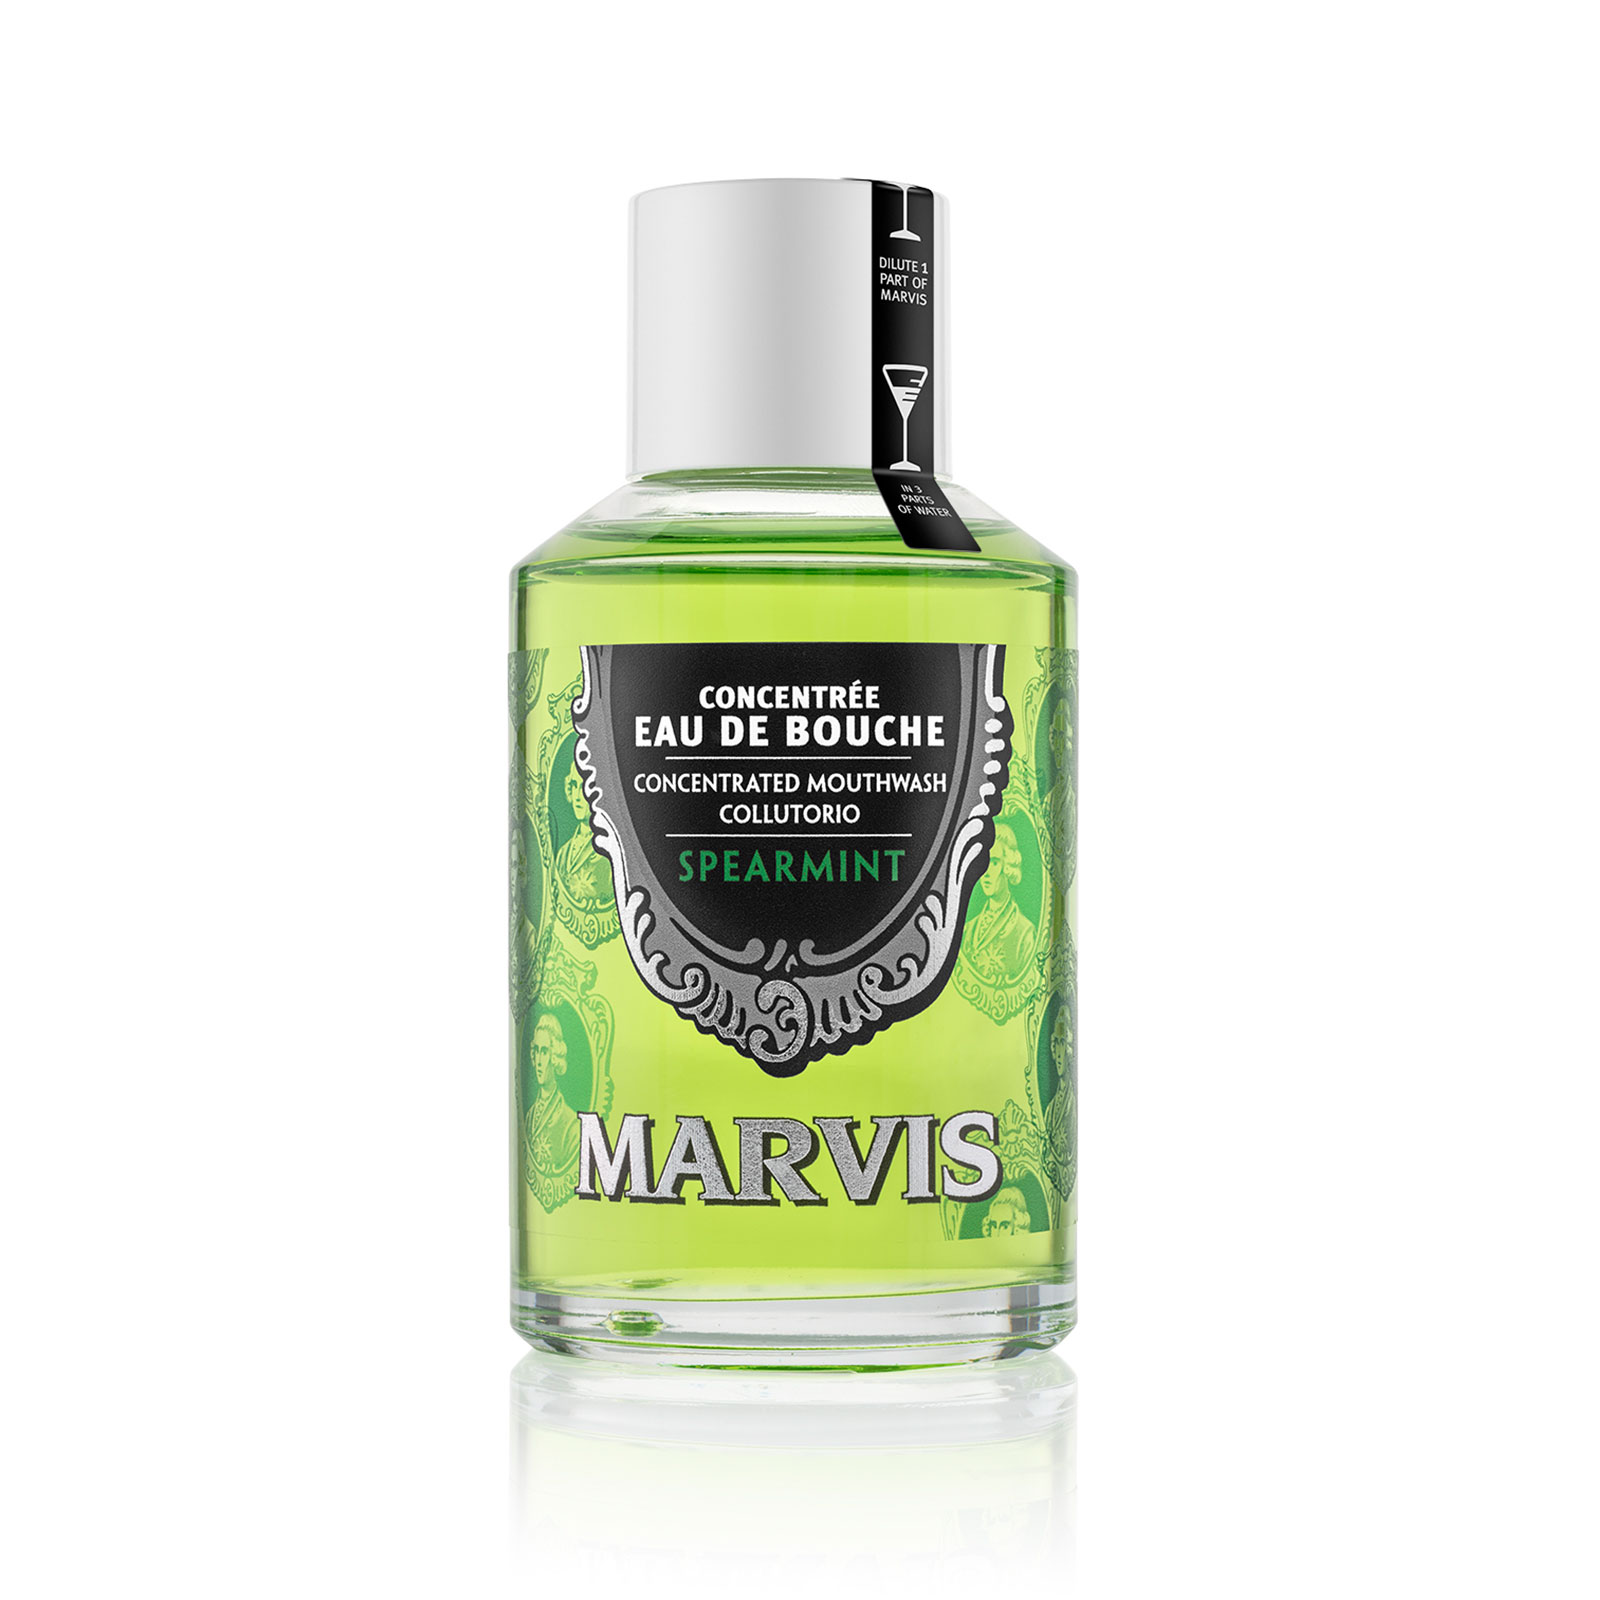 Ополаскиватель Marvis Spearmint Мята marvis concentrated mouthwash сollutorio spearmint